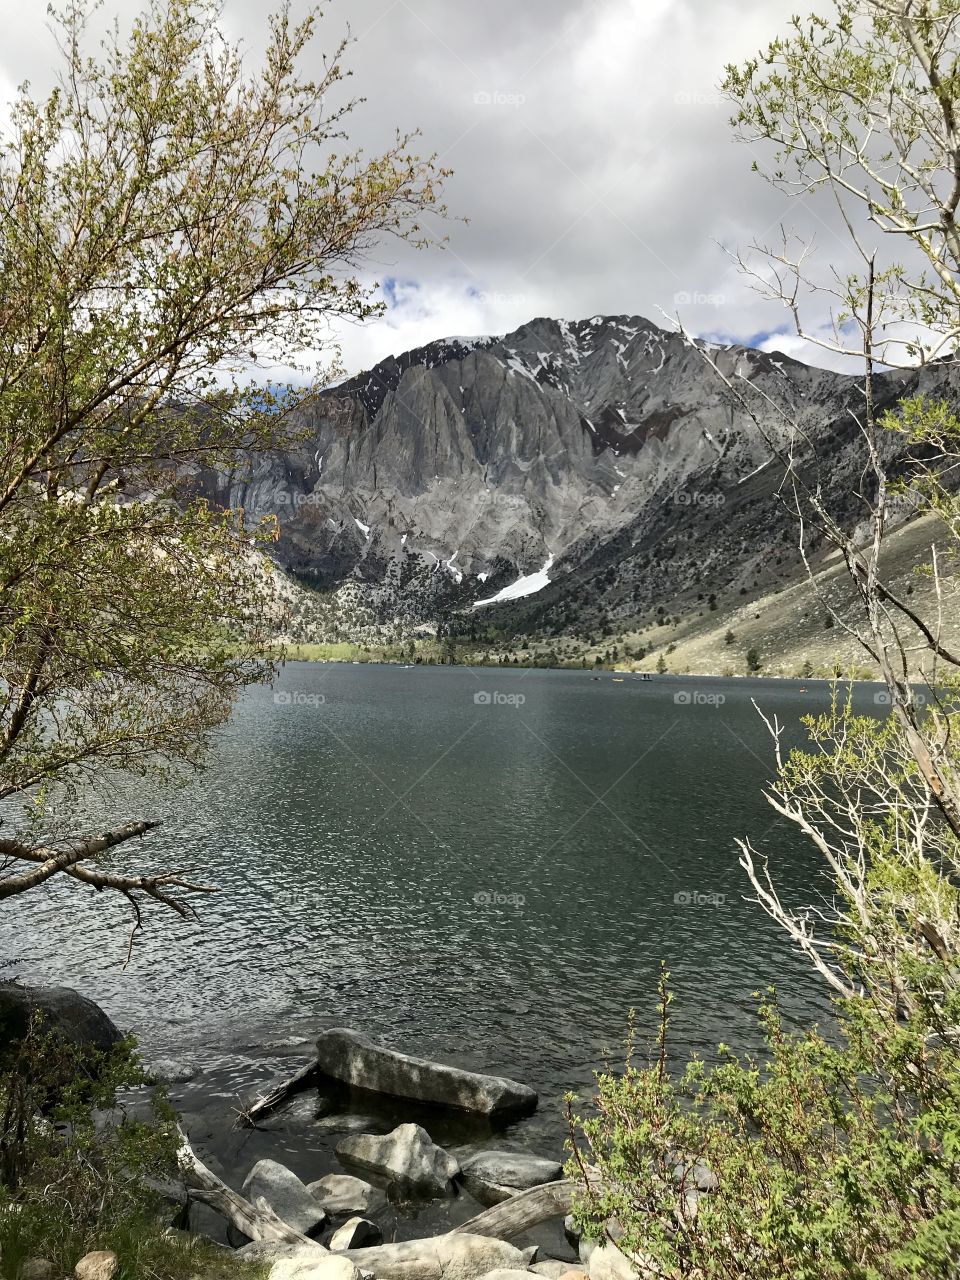 Convict lake in high Sierras in California. A great spot for fishing. There is a nice hiking path along it and a nearby campground